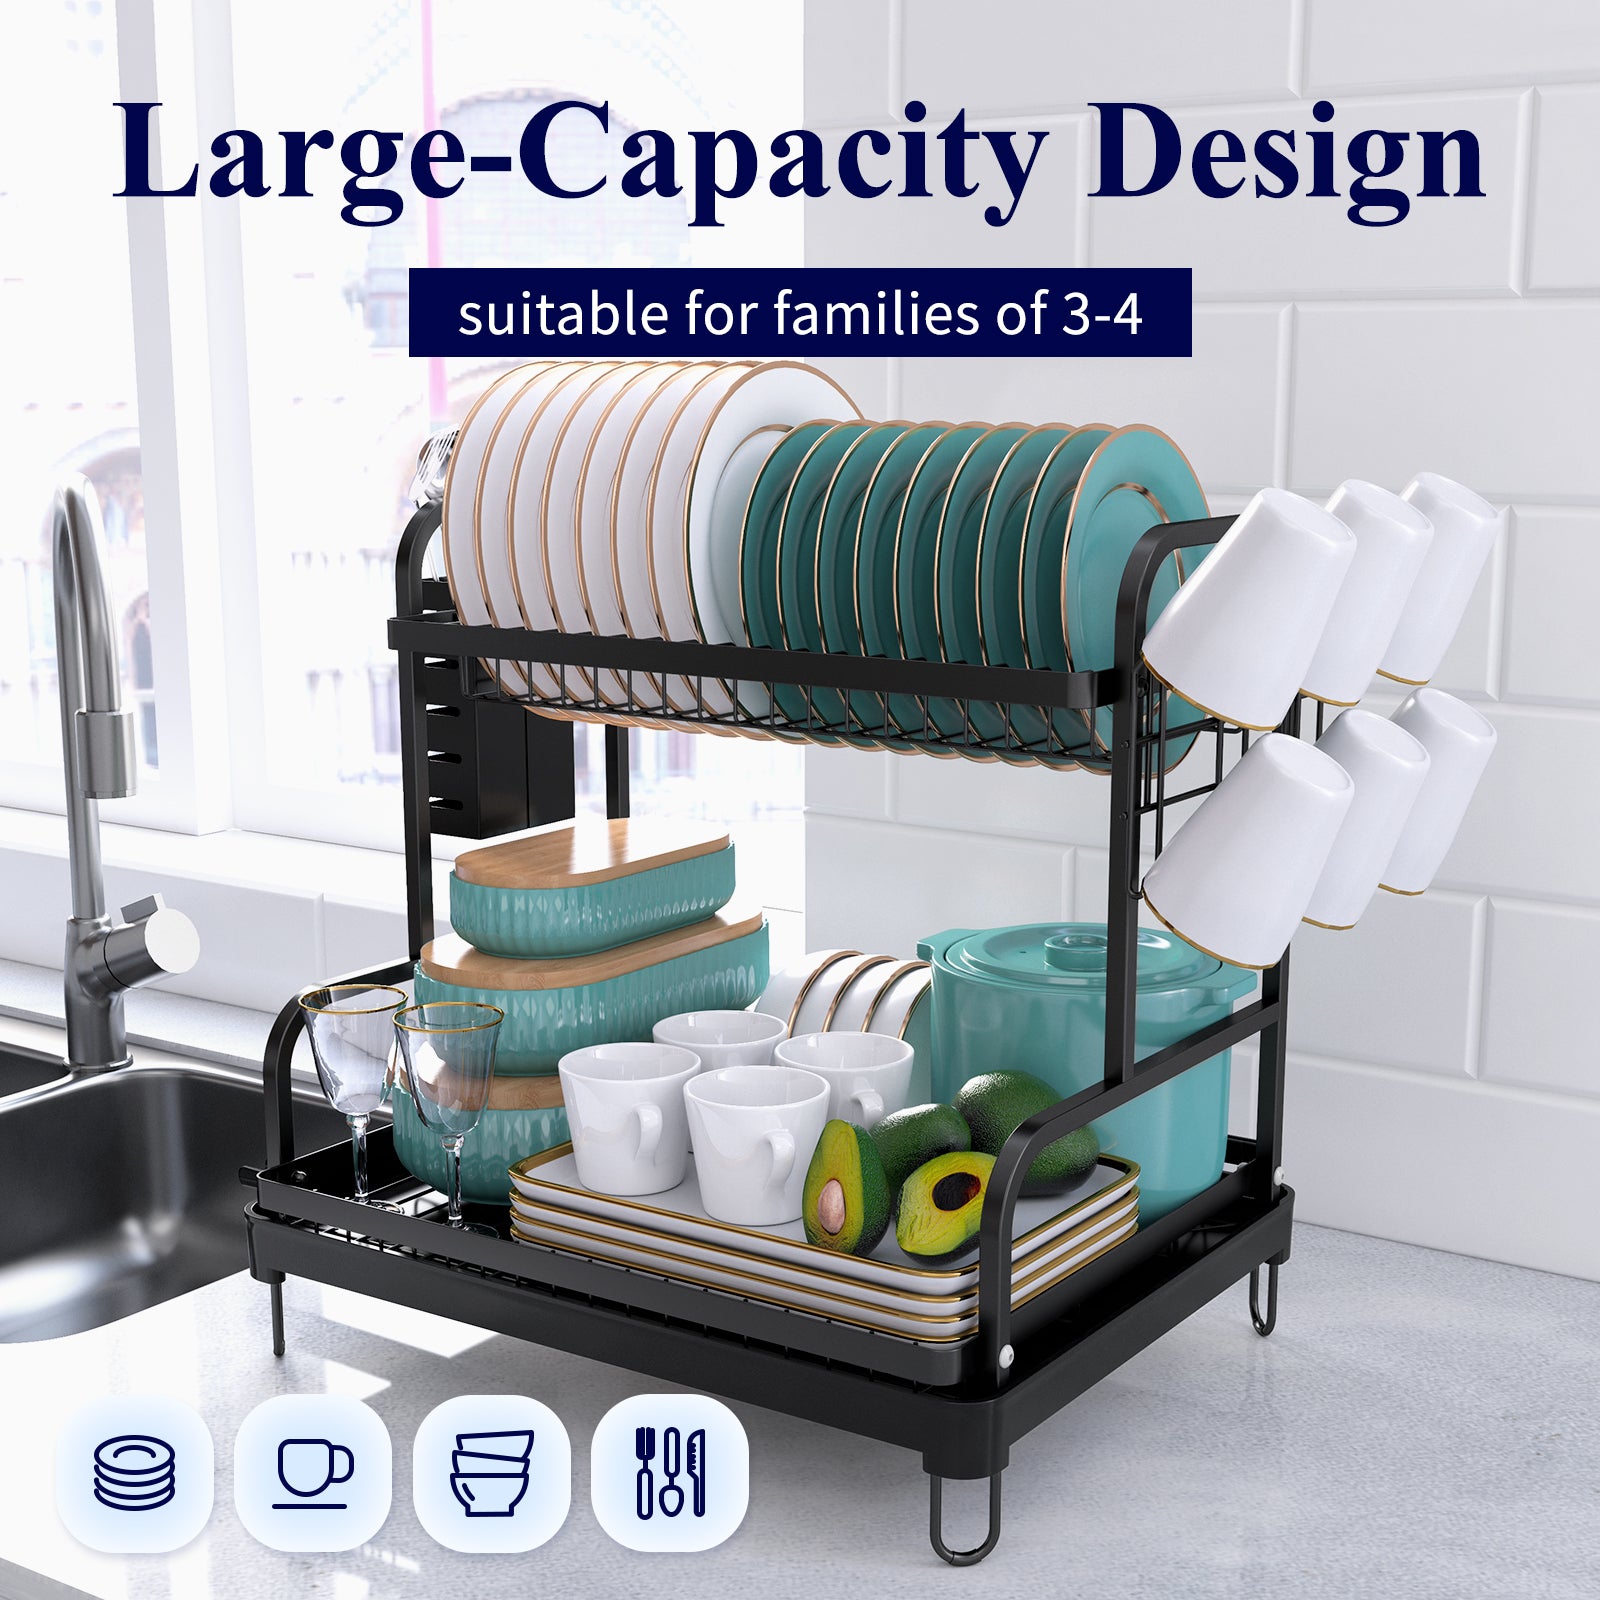 Dish Rack,3 Tier Dish Drying Drainer Rack,Ideal for Kitchen